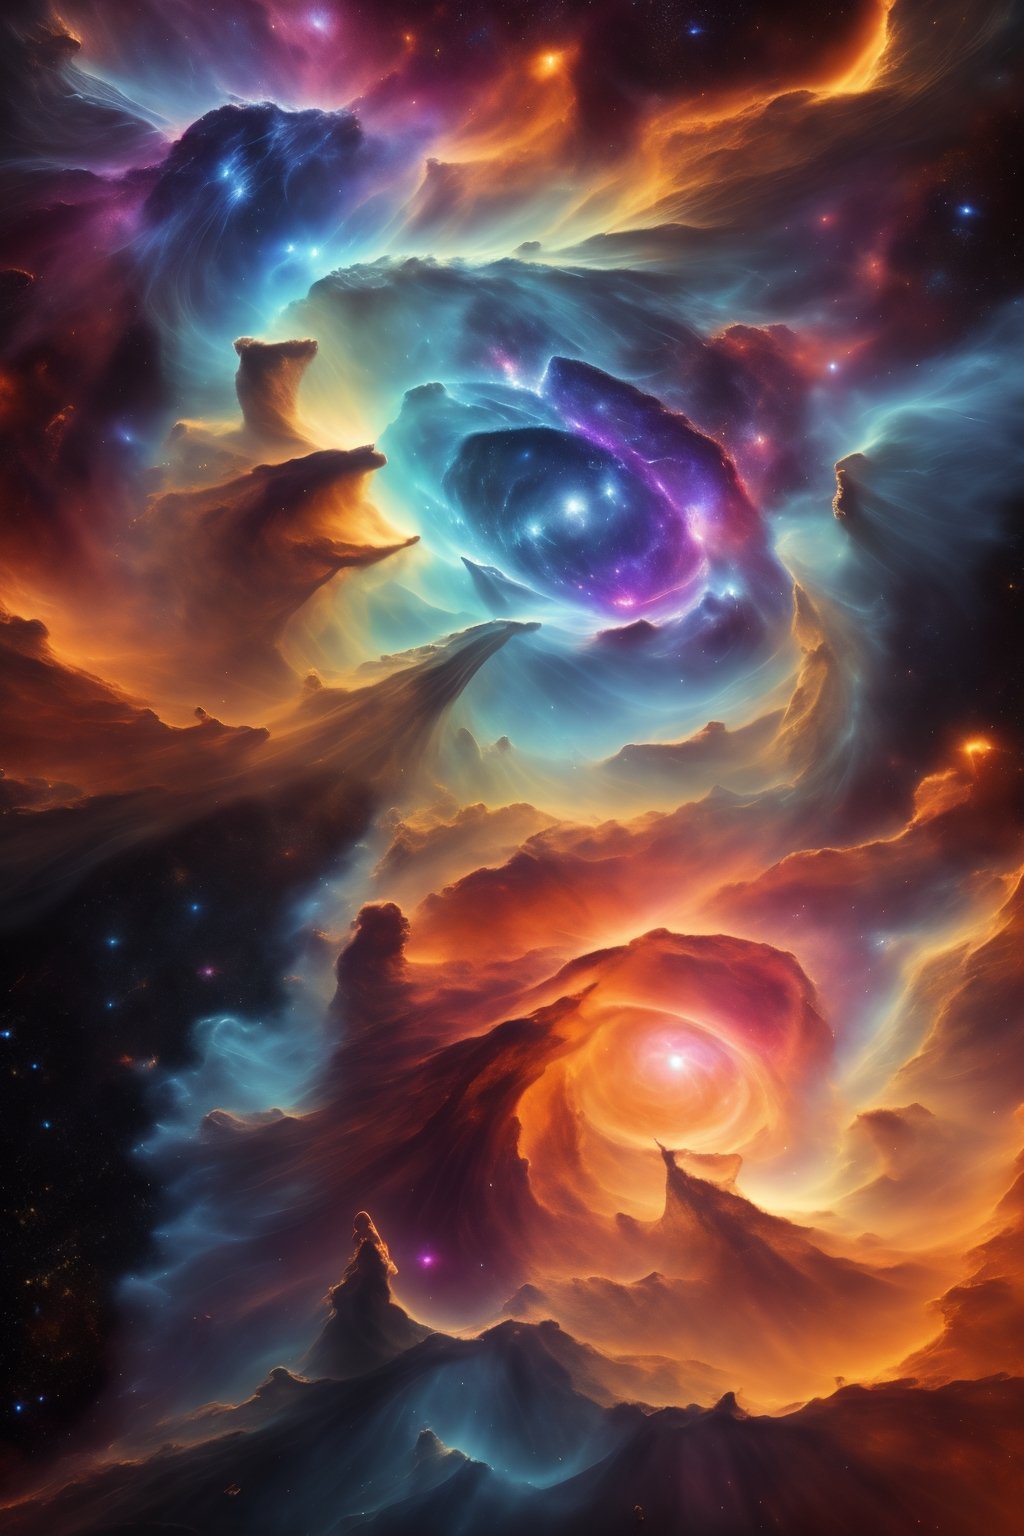 (best quality, 8K, ultra-detailed, masterpiece), (outer space, nebula, galaxy), Transport the viewer to the depths of the cosmos with an 8K masterpiece. Render a cinematic, photorealistic portrayal of outer space, highlighting a breathtaking nebula and galaxy. Pay meticulous attention to ultra-details in the cosmic landscape, capturing the vivid colors and intricate patterns of celestial phenomena. This image should evoke a sense of wonder and awe as it immerses the viewer in the grandeur of the universe.